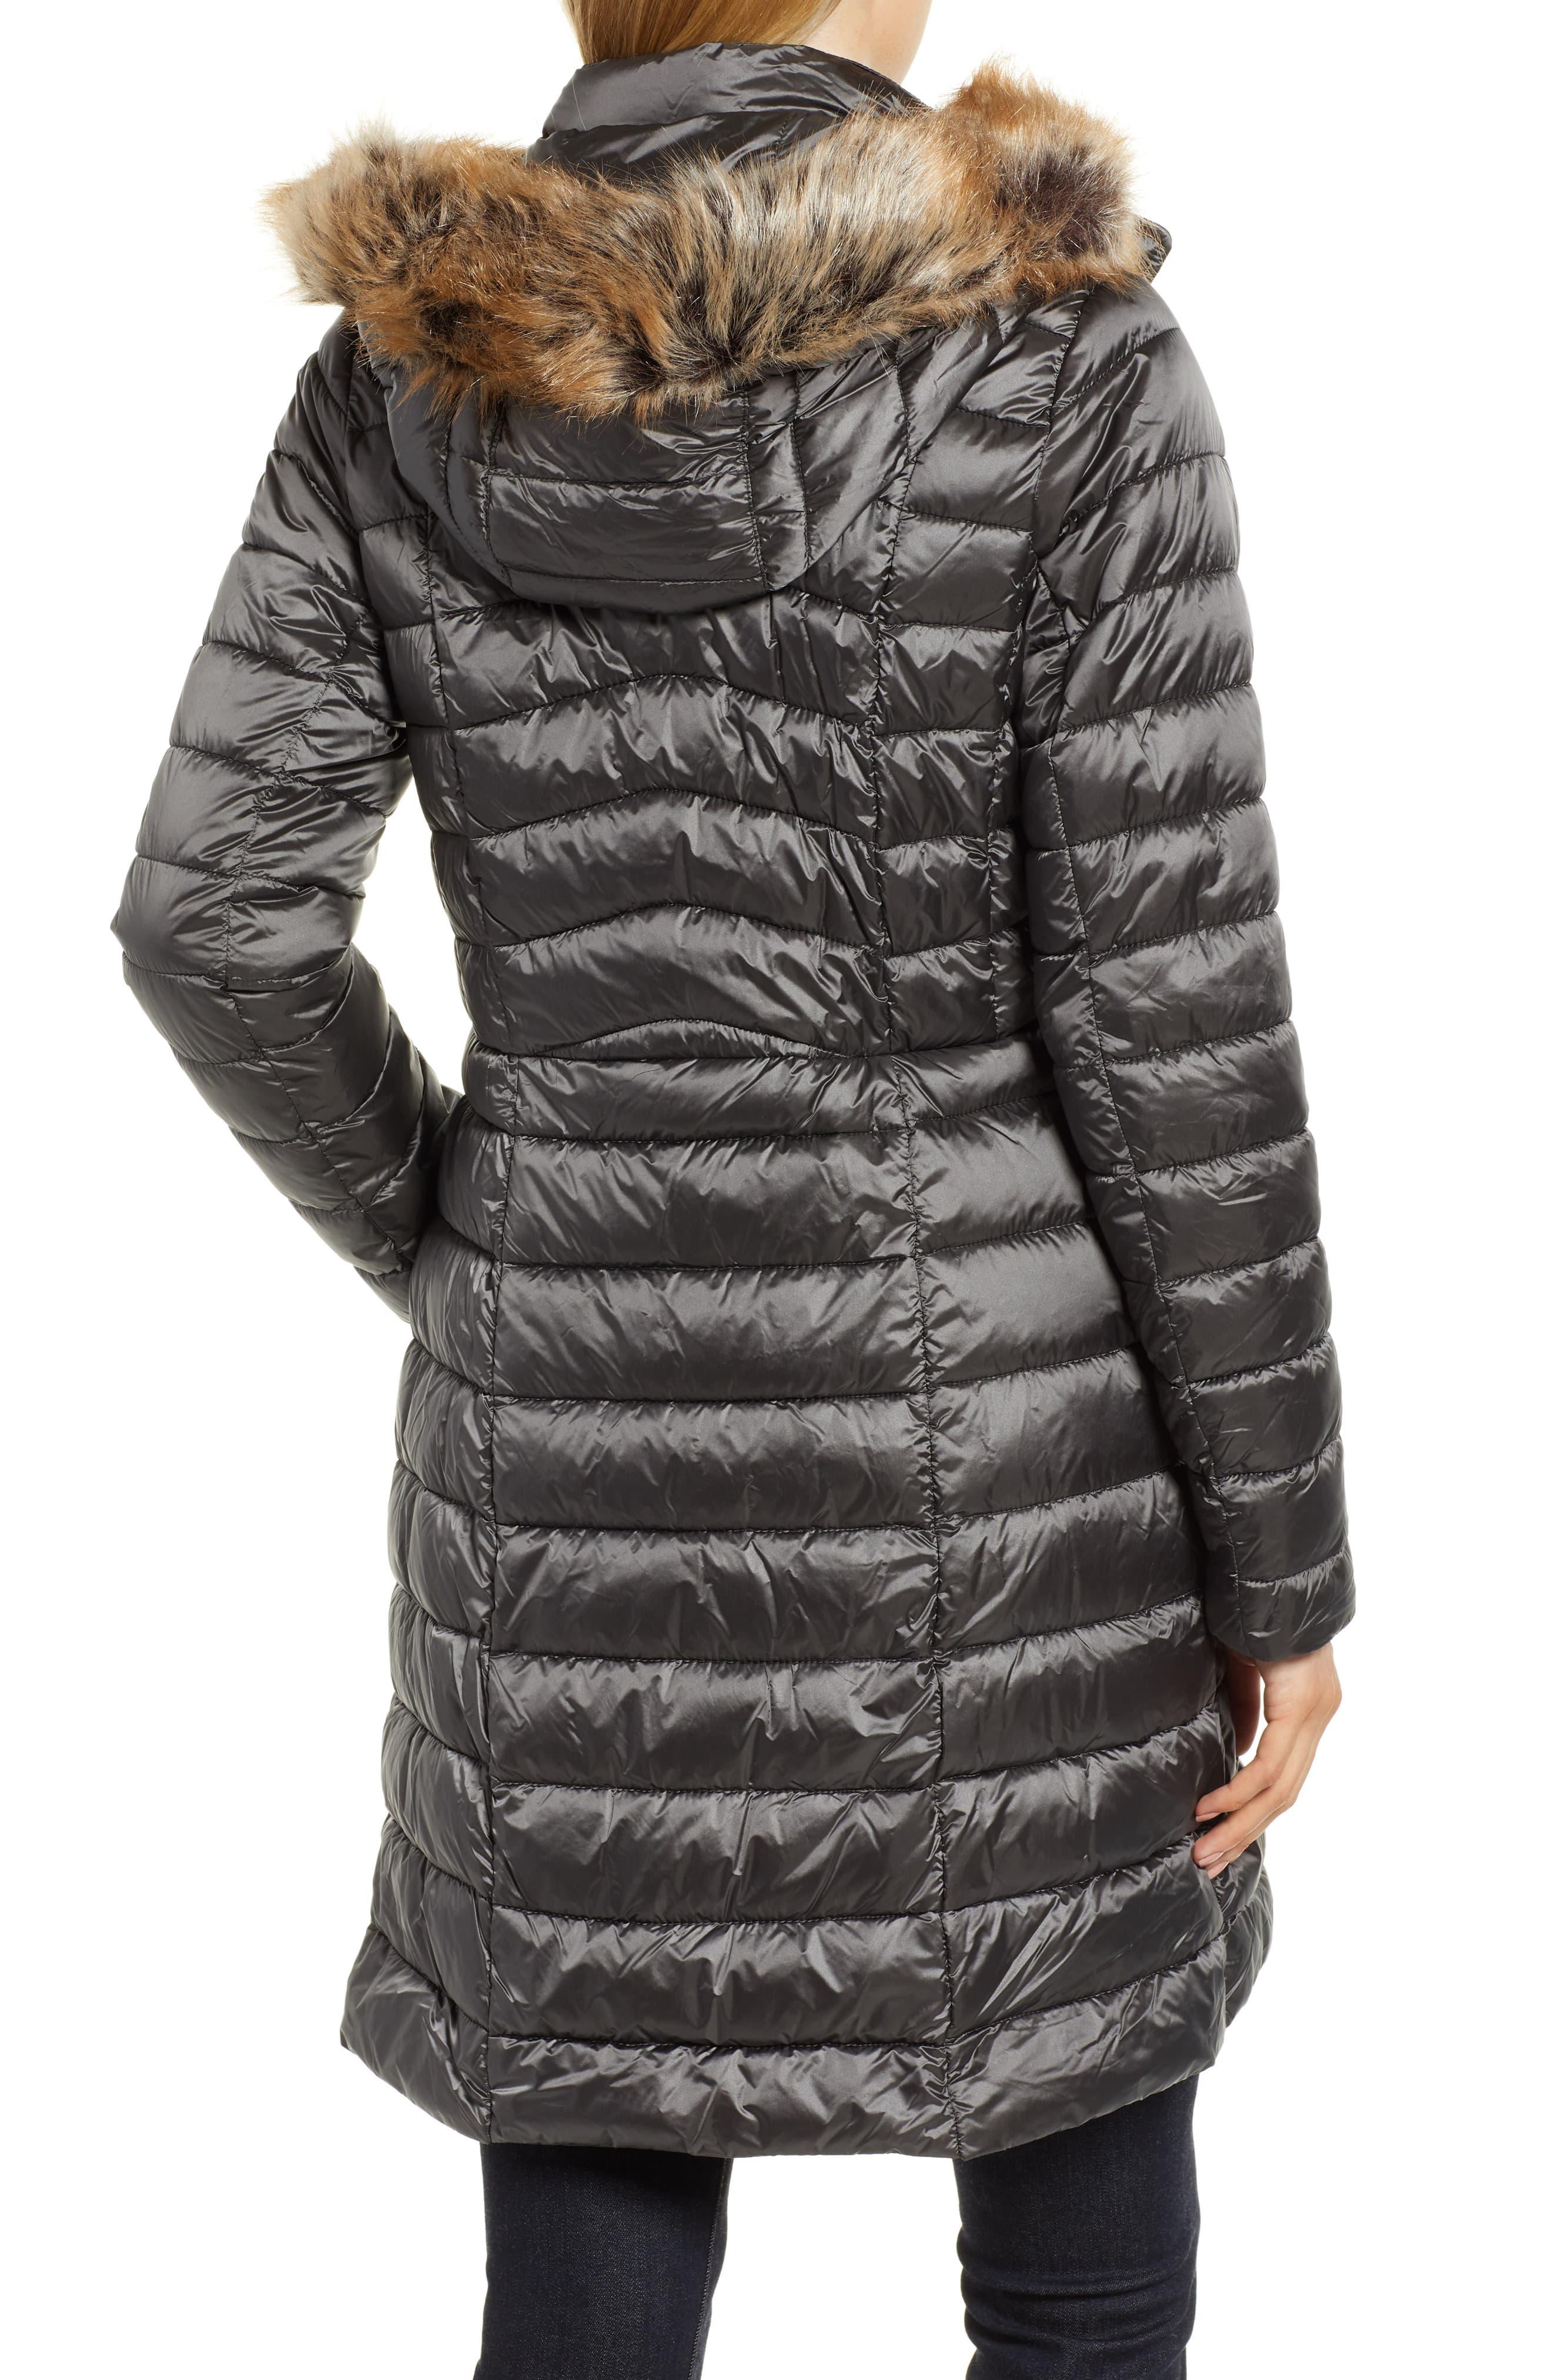 Barbour Berneray Quilted Jacket Ash Grey Clearance, SAVE 50%.